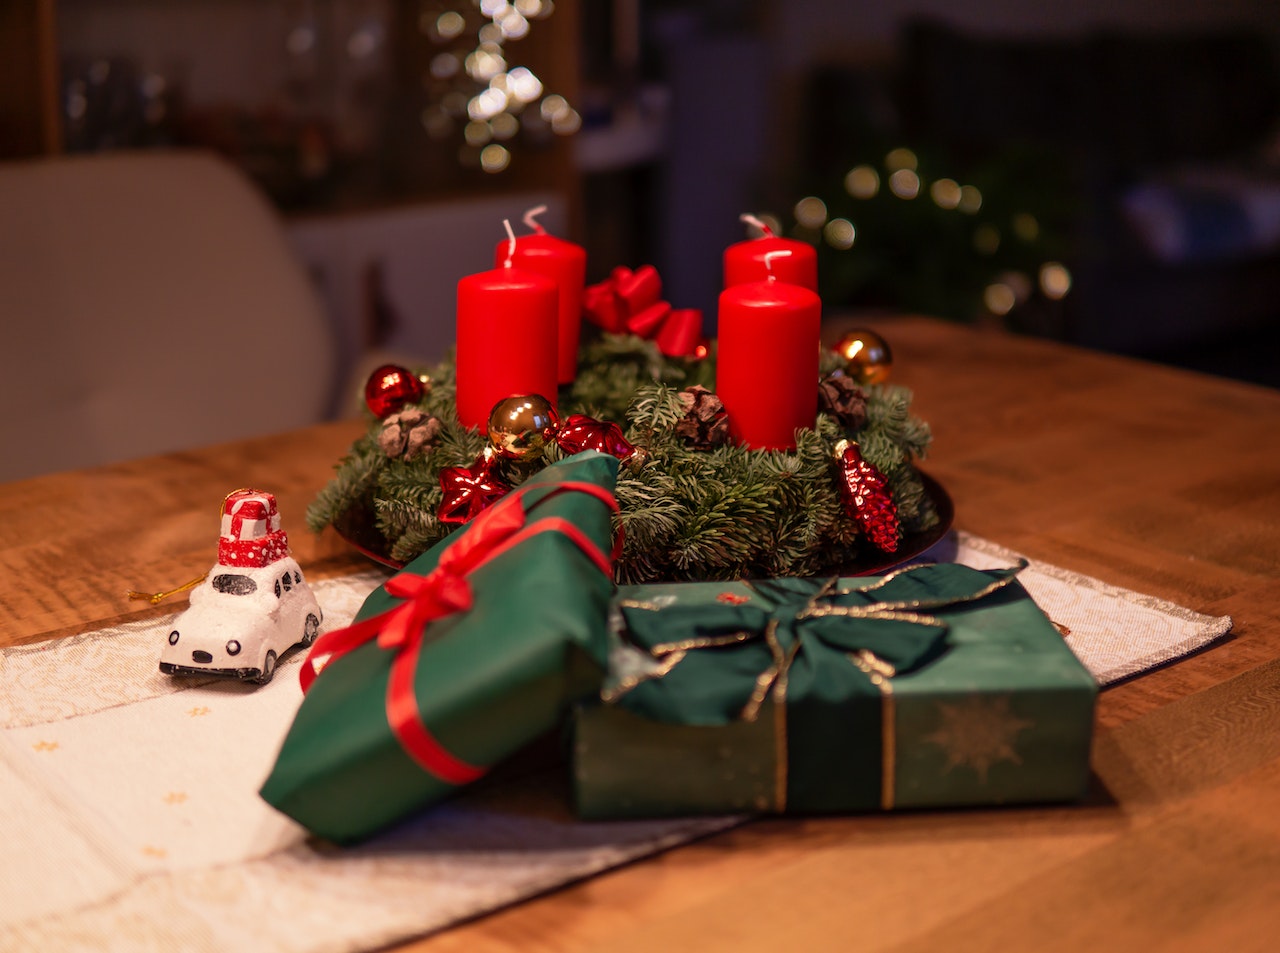 unlighted red advent candles on table beside green gift boxes